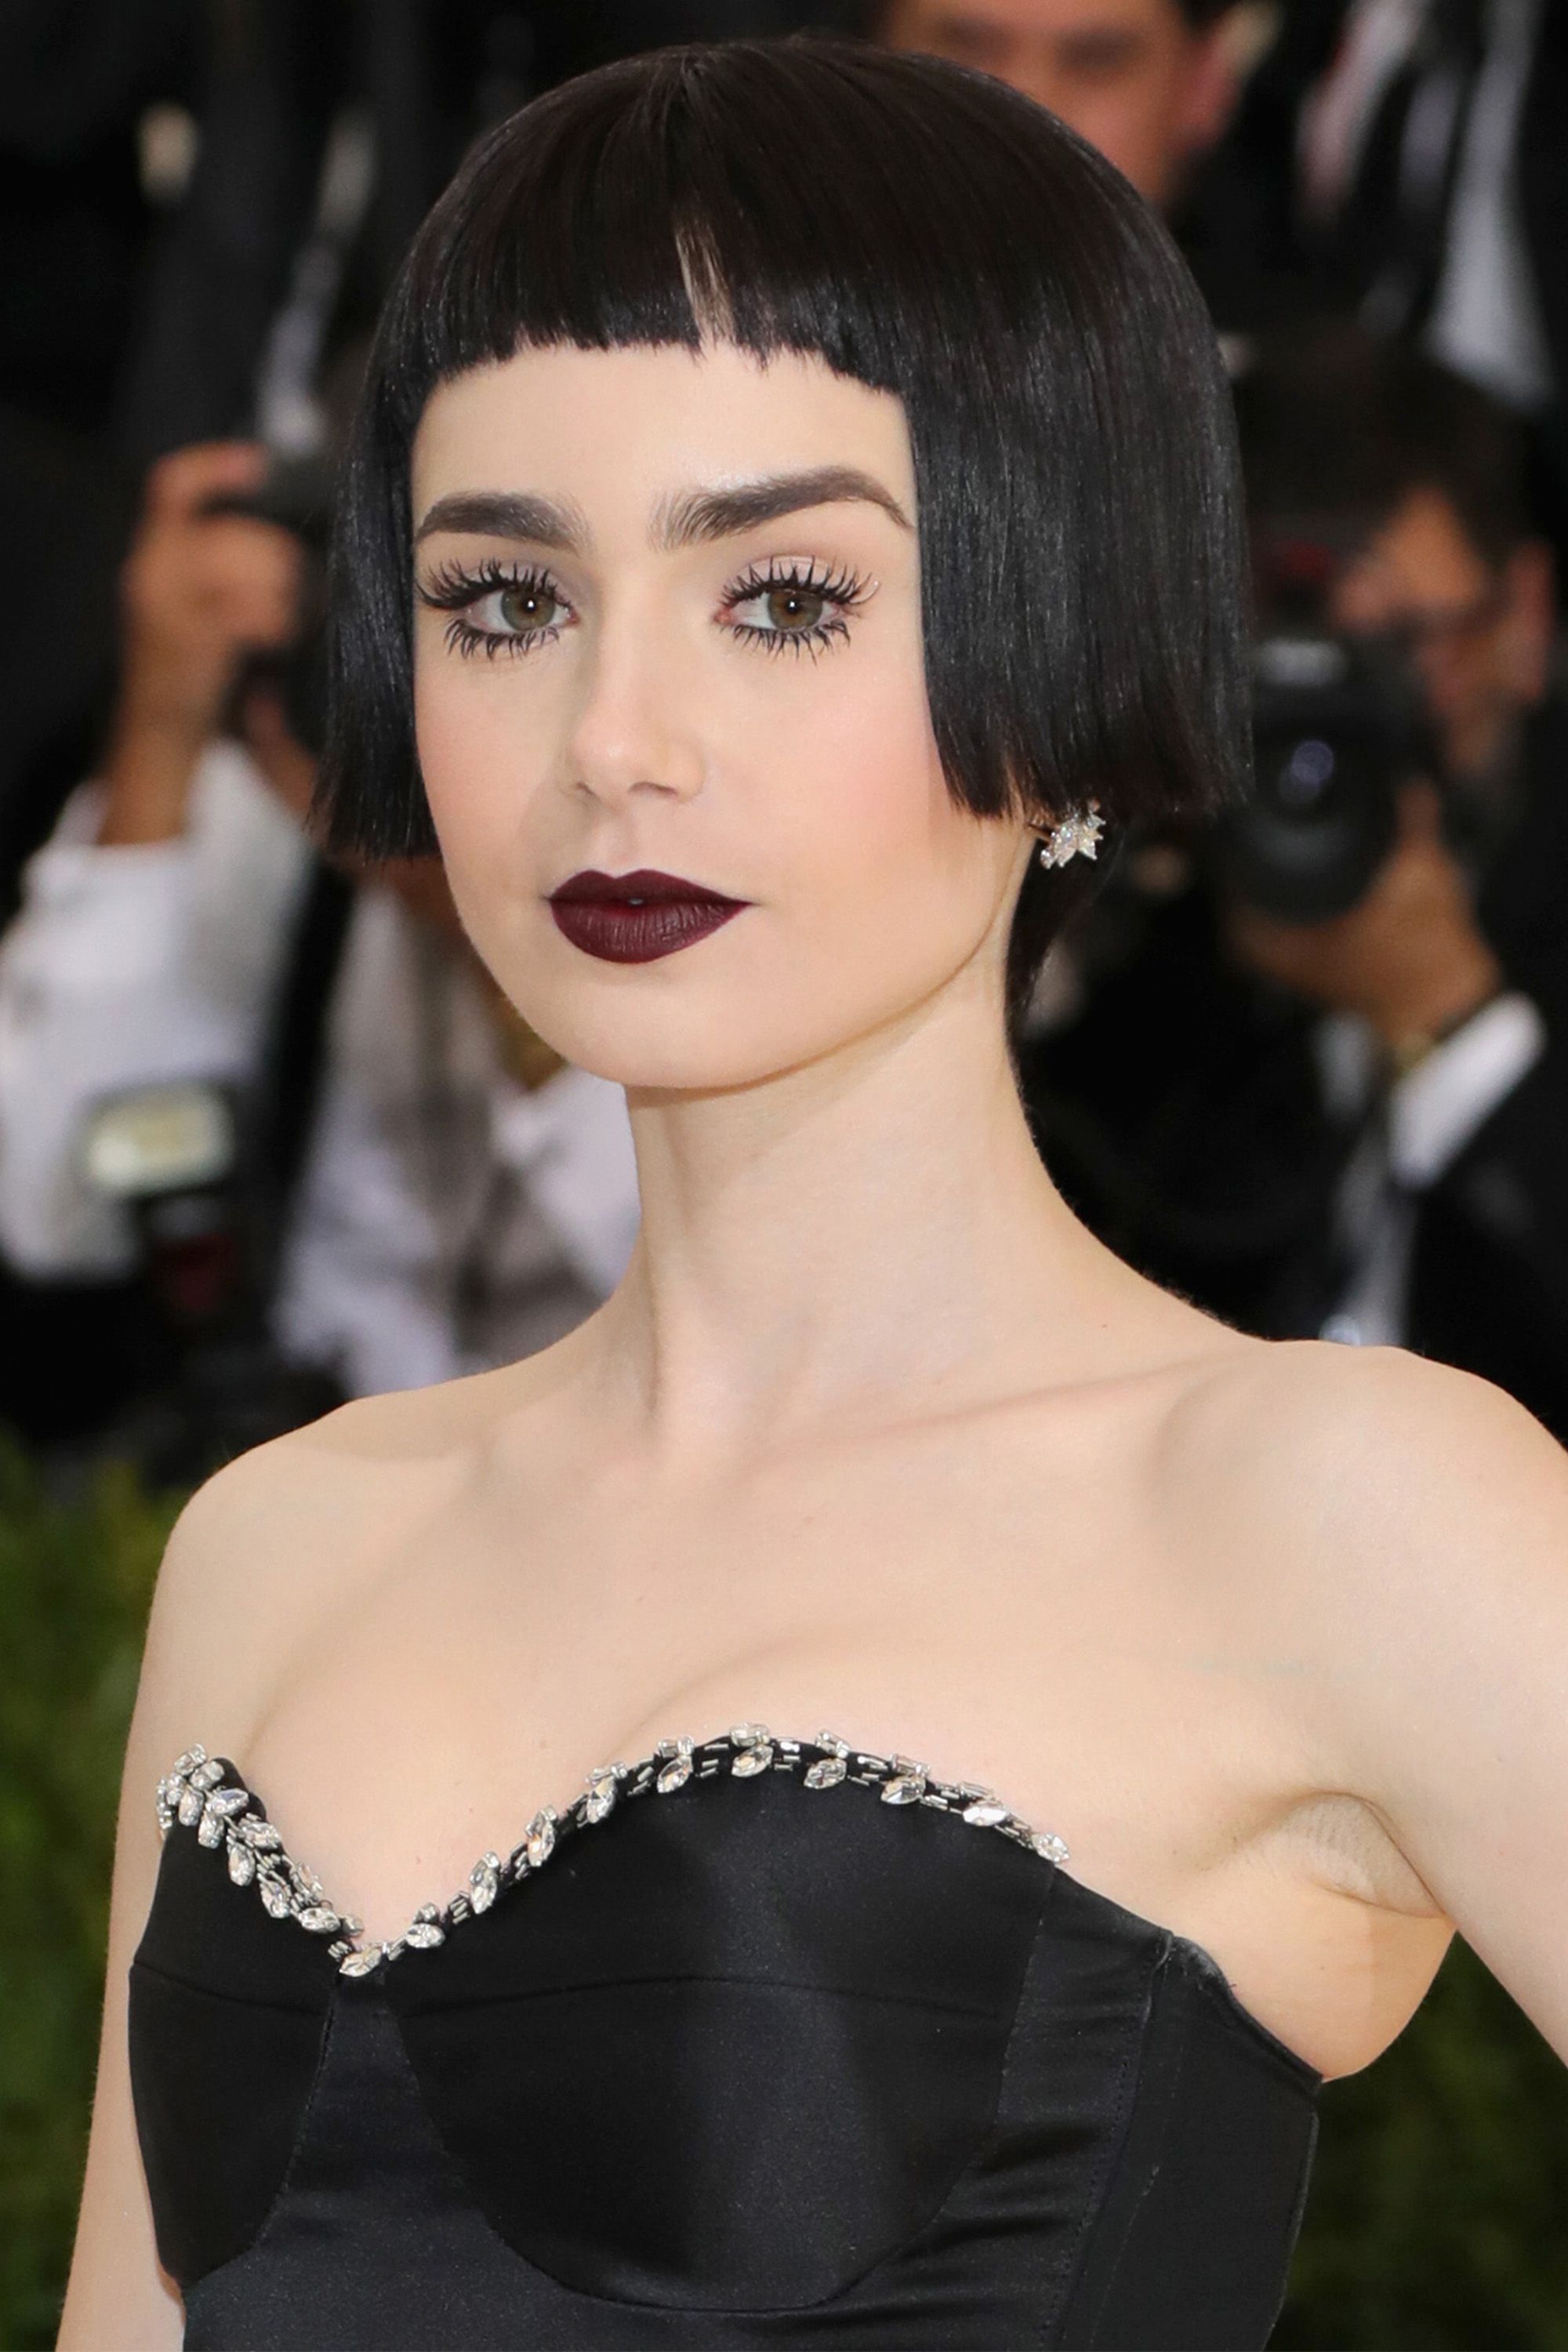 Met Gala 2017: The most exciting hair and makeup from the red carpet